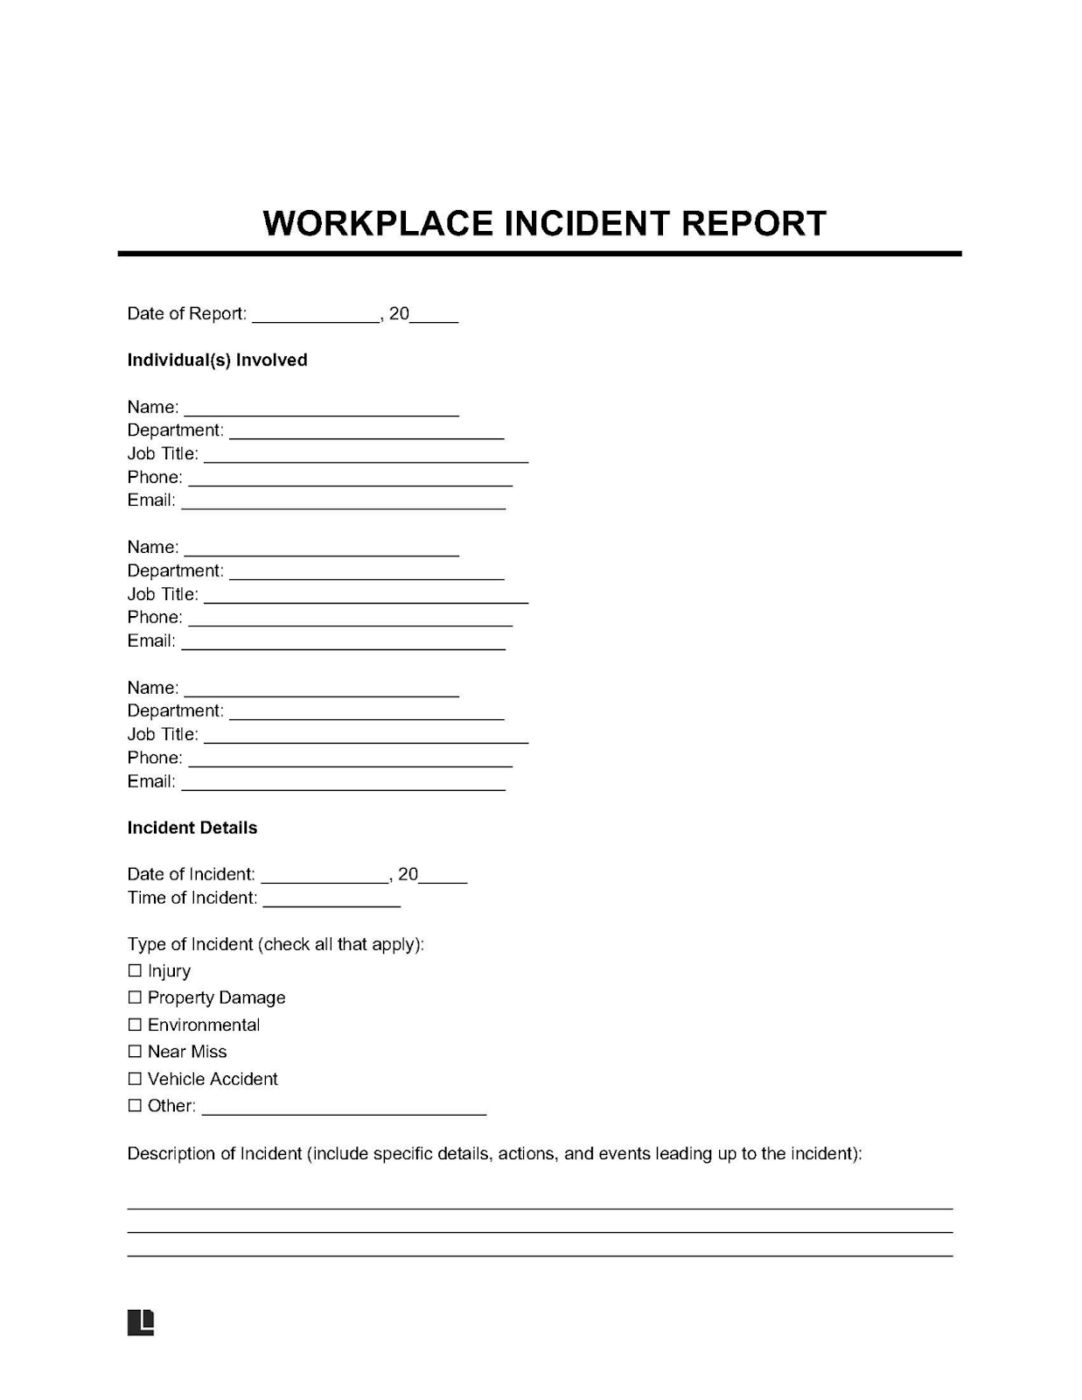 Workplace Incident Report